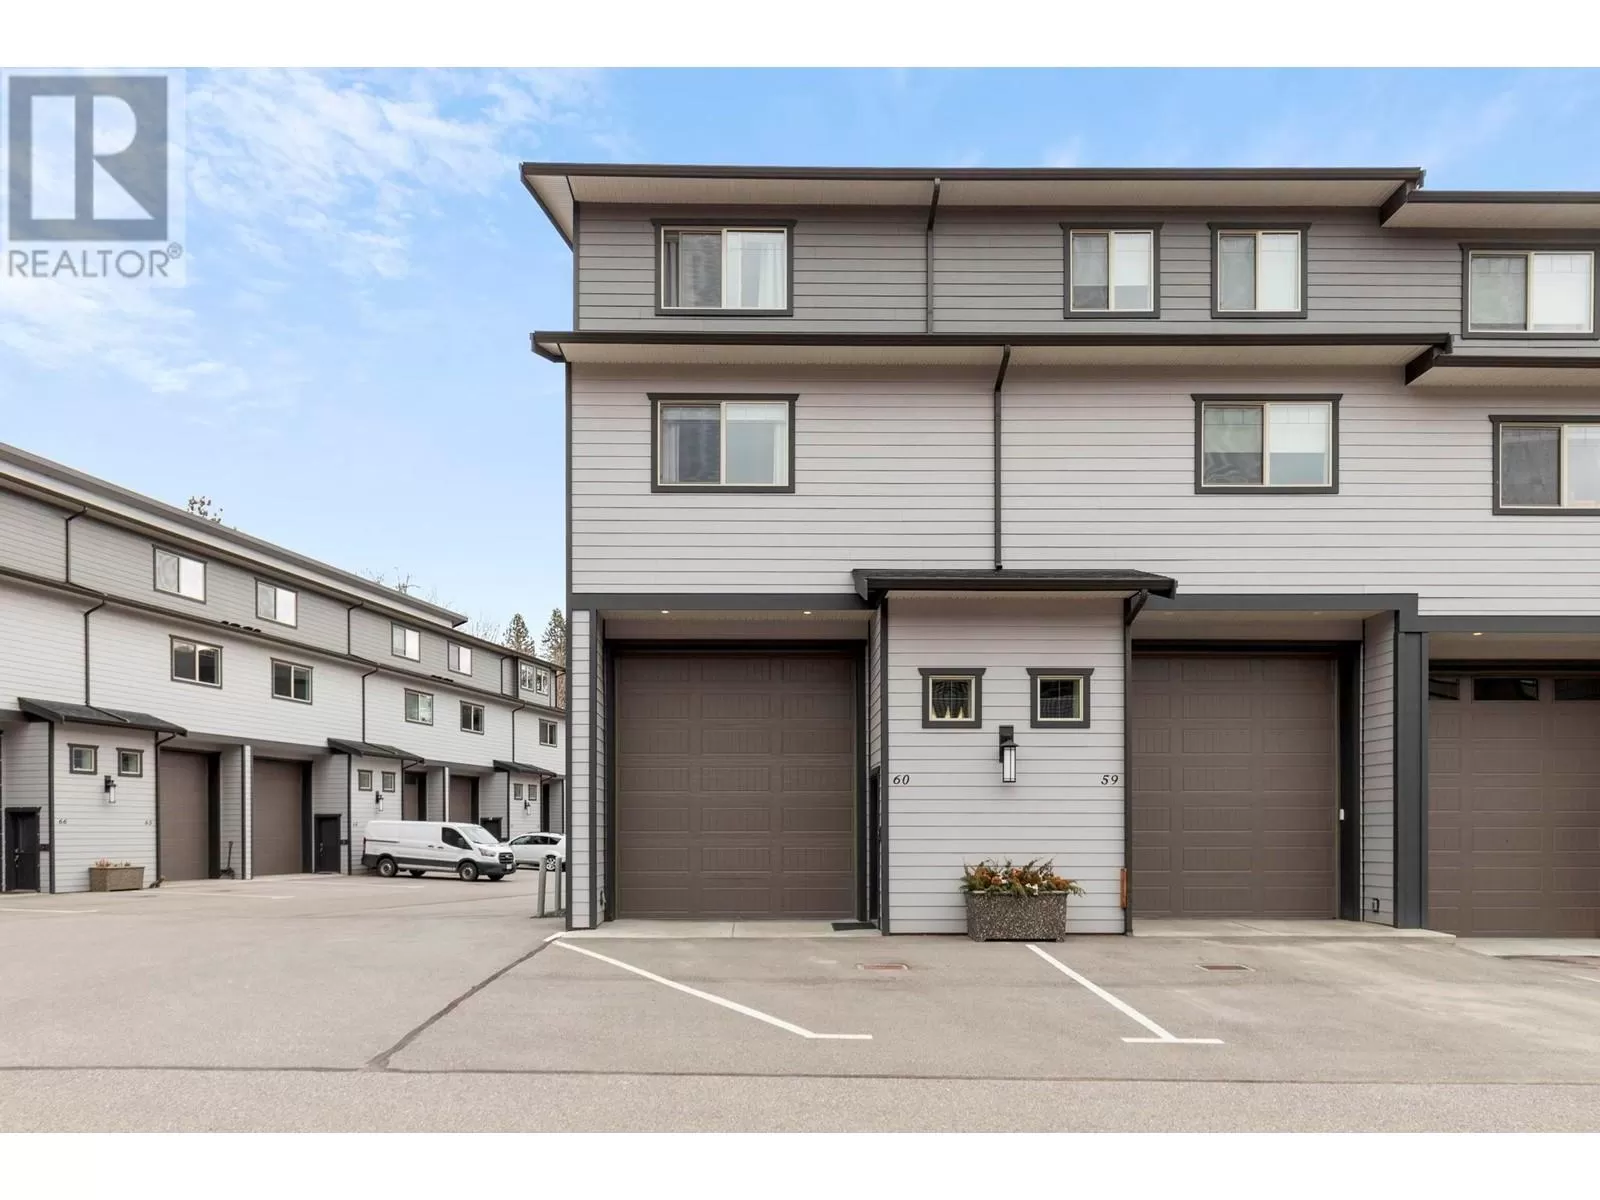 Row / Townhouse for rent: 3359 Cougar Road Unit# 60, West Kelowna, British Columbia V4T 3G1